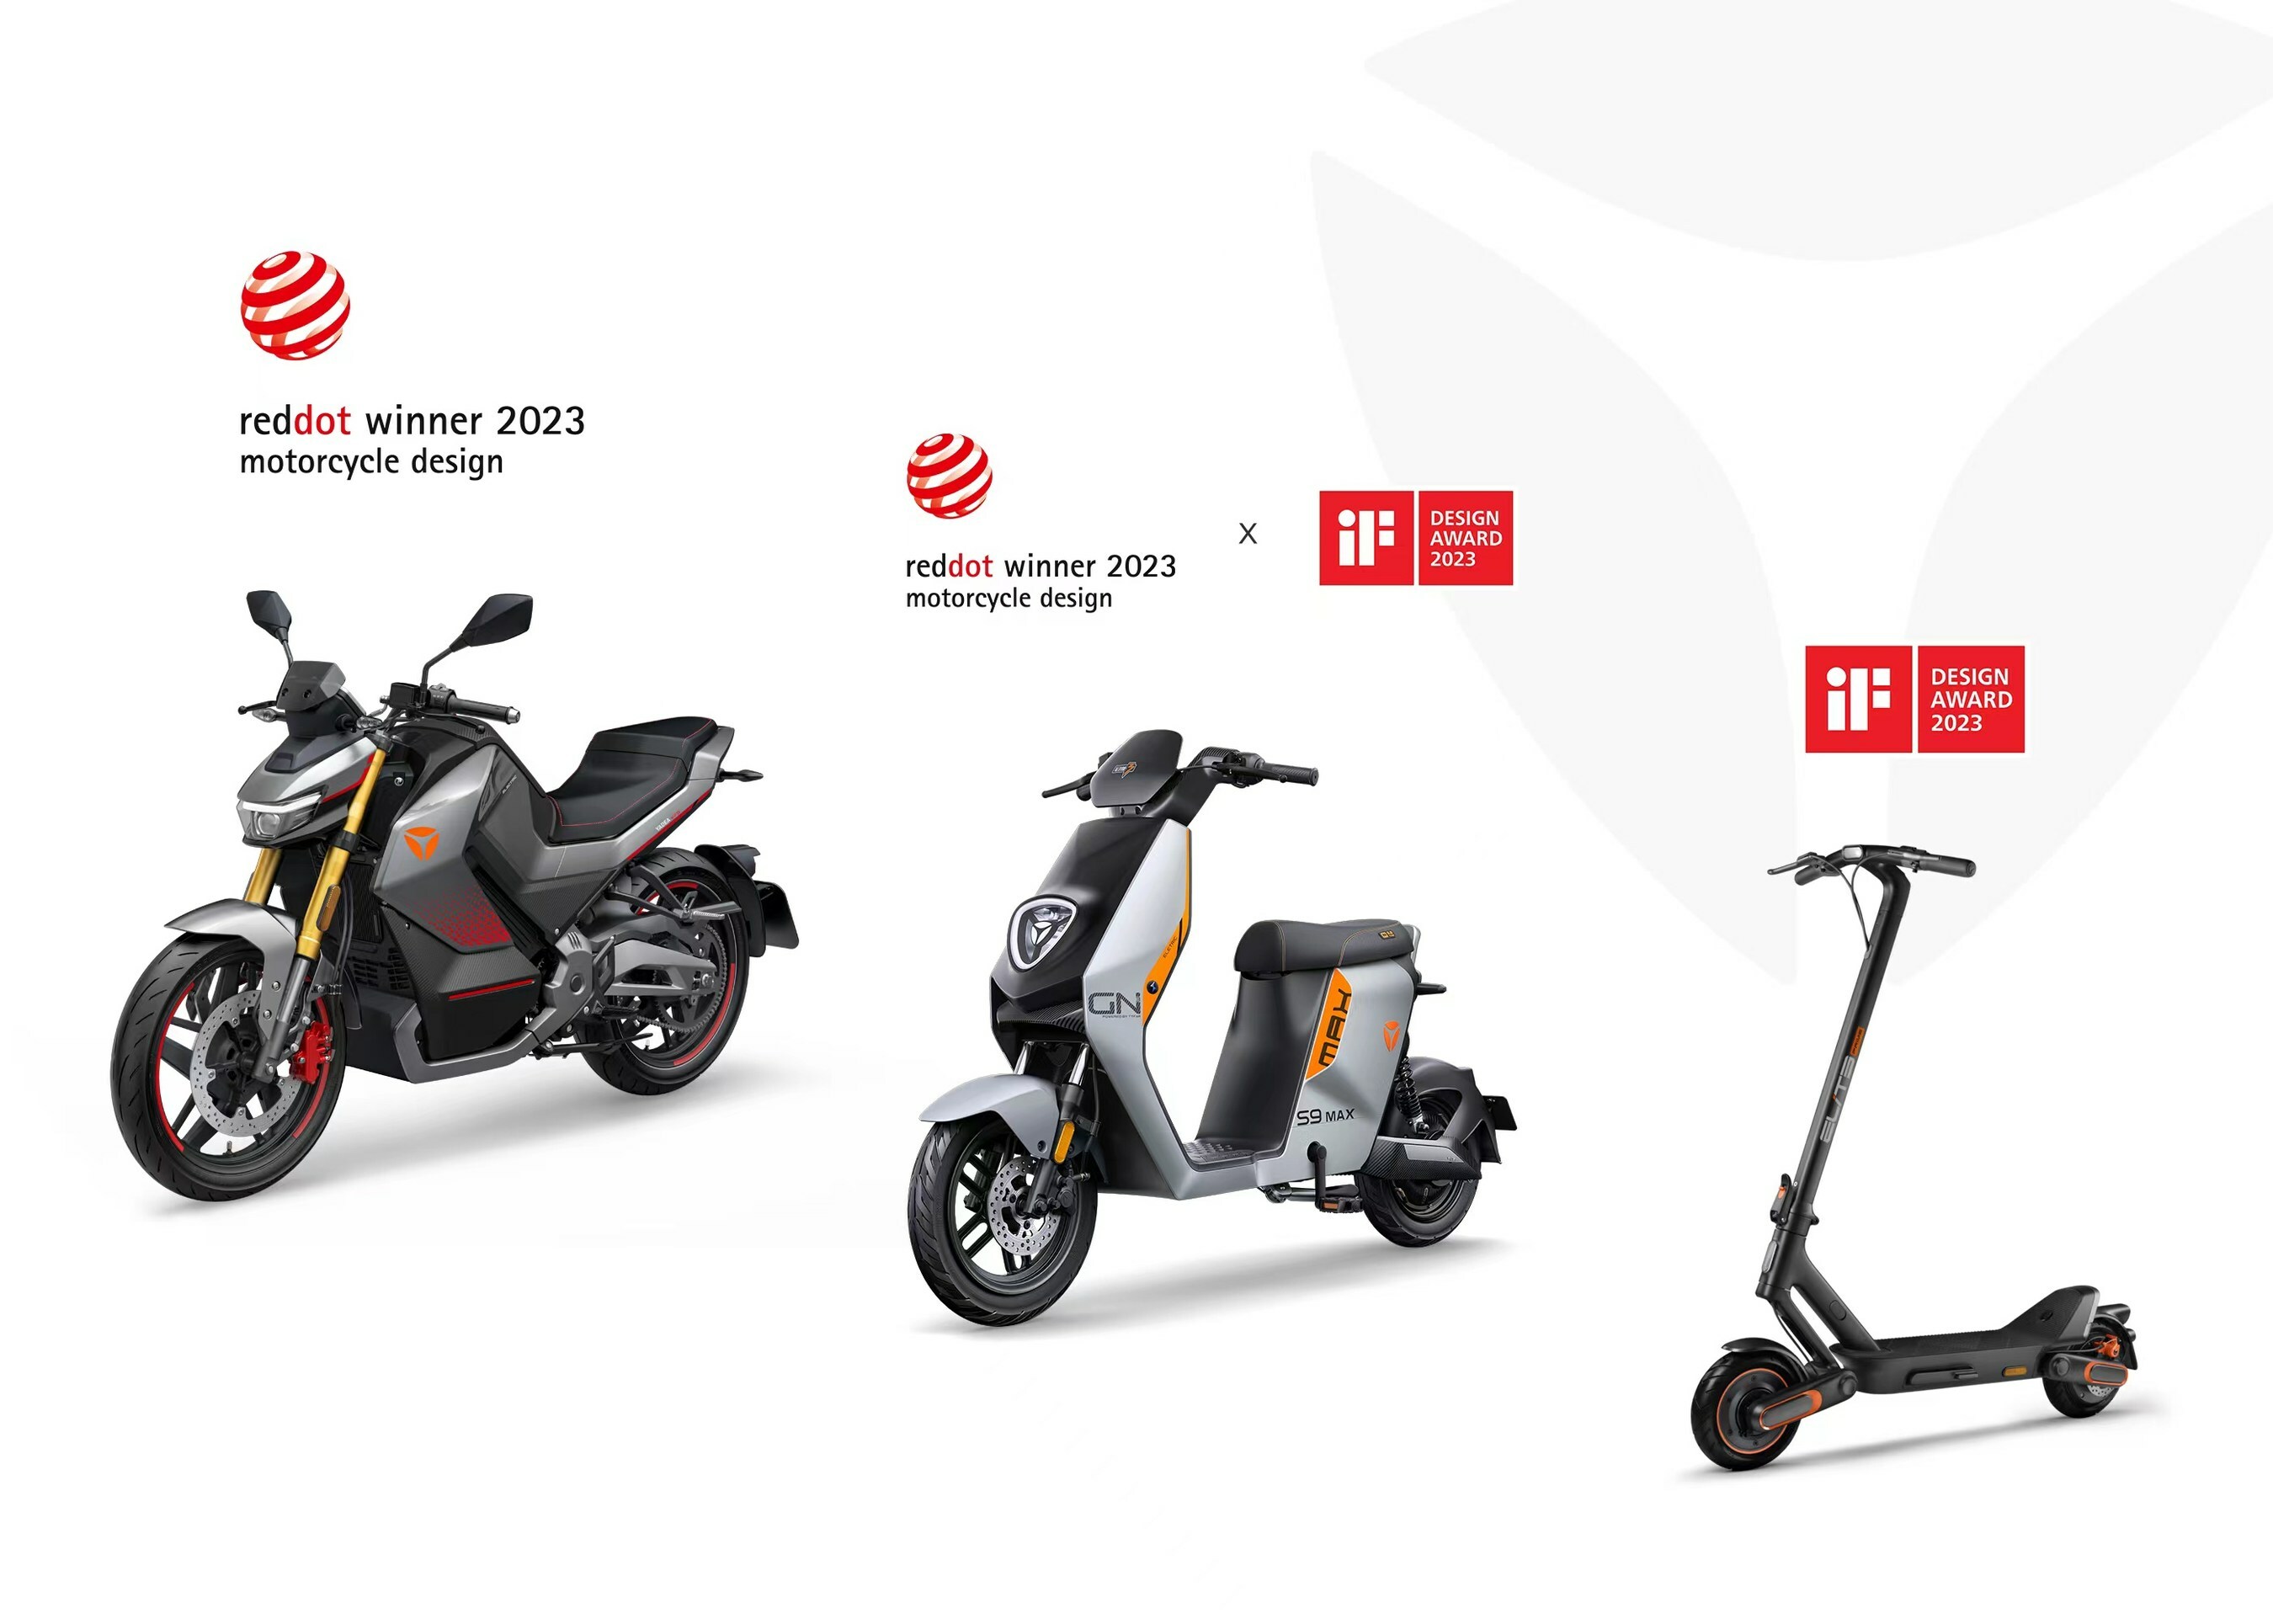 Yadea High-performance E-mobility Won German 2023 Red Dot Awards and the iF DESIGN AWARDs